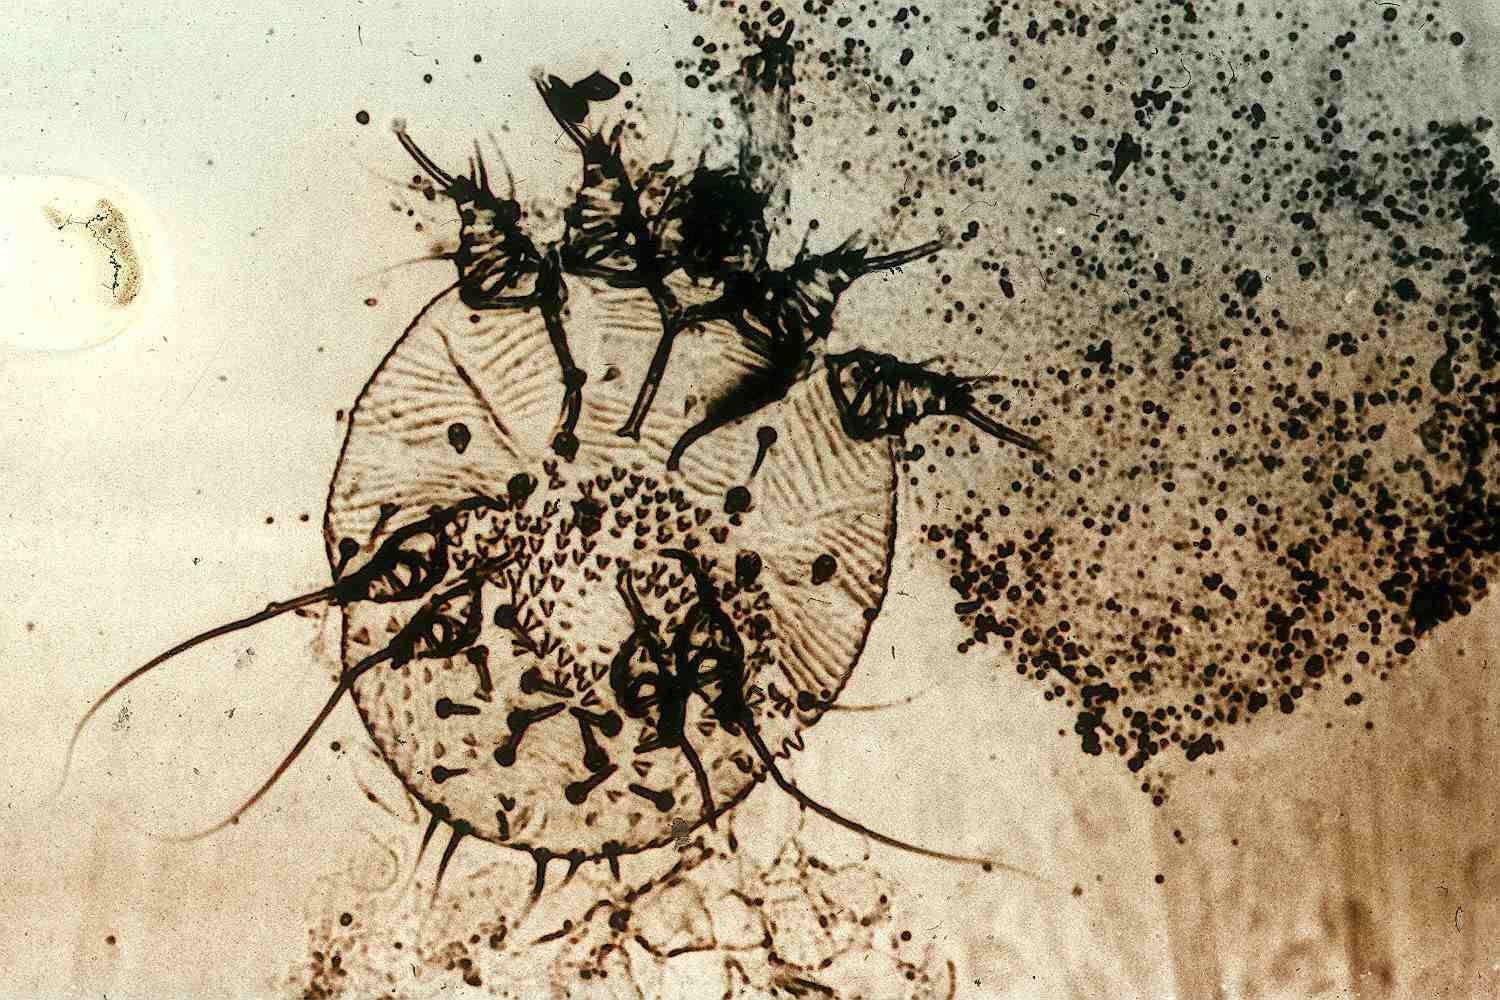 Microscopic view of a mange mite.